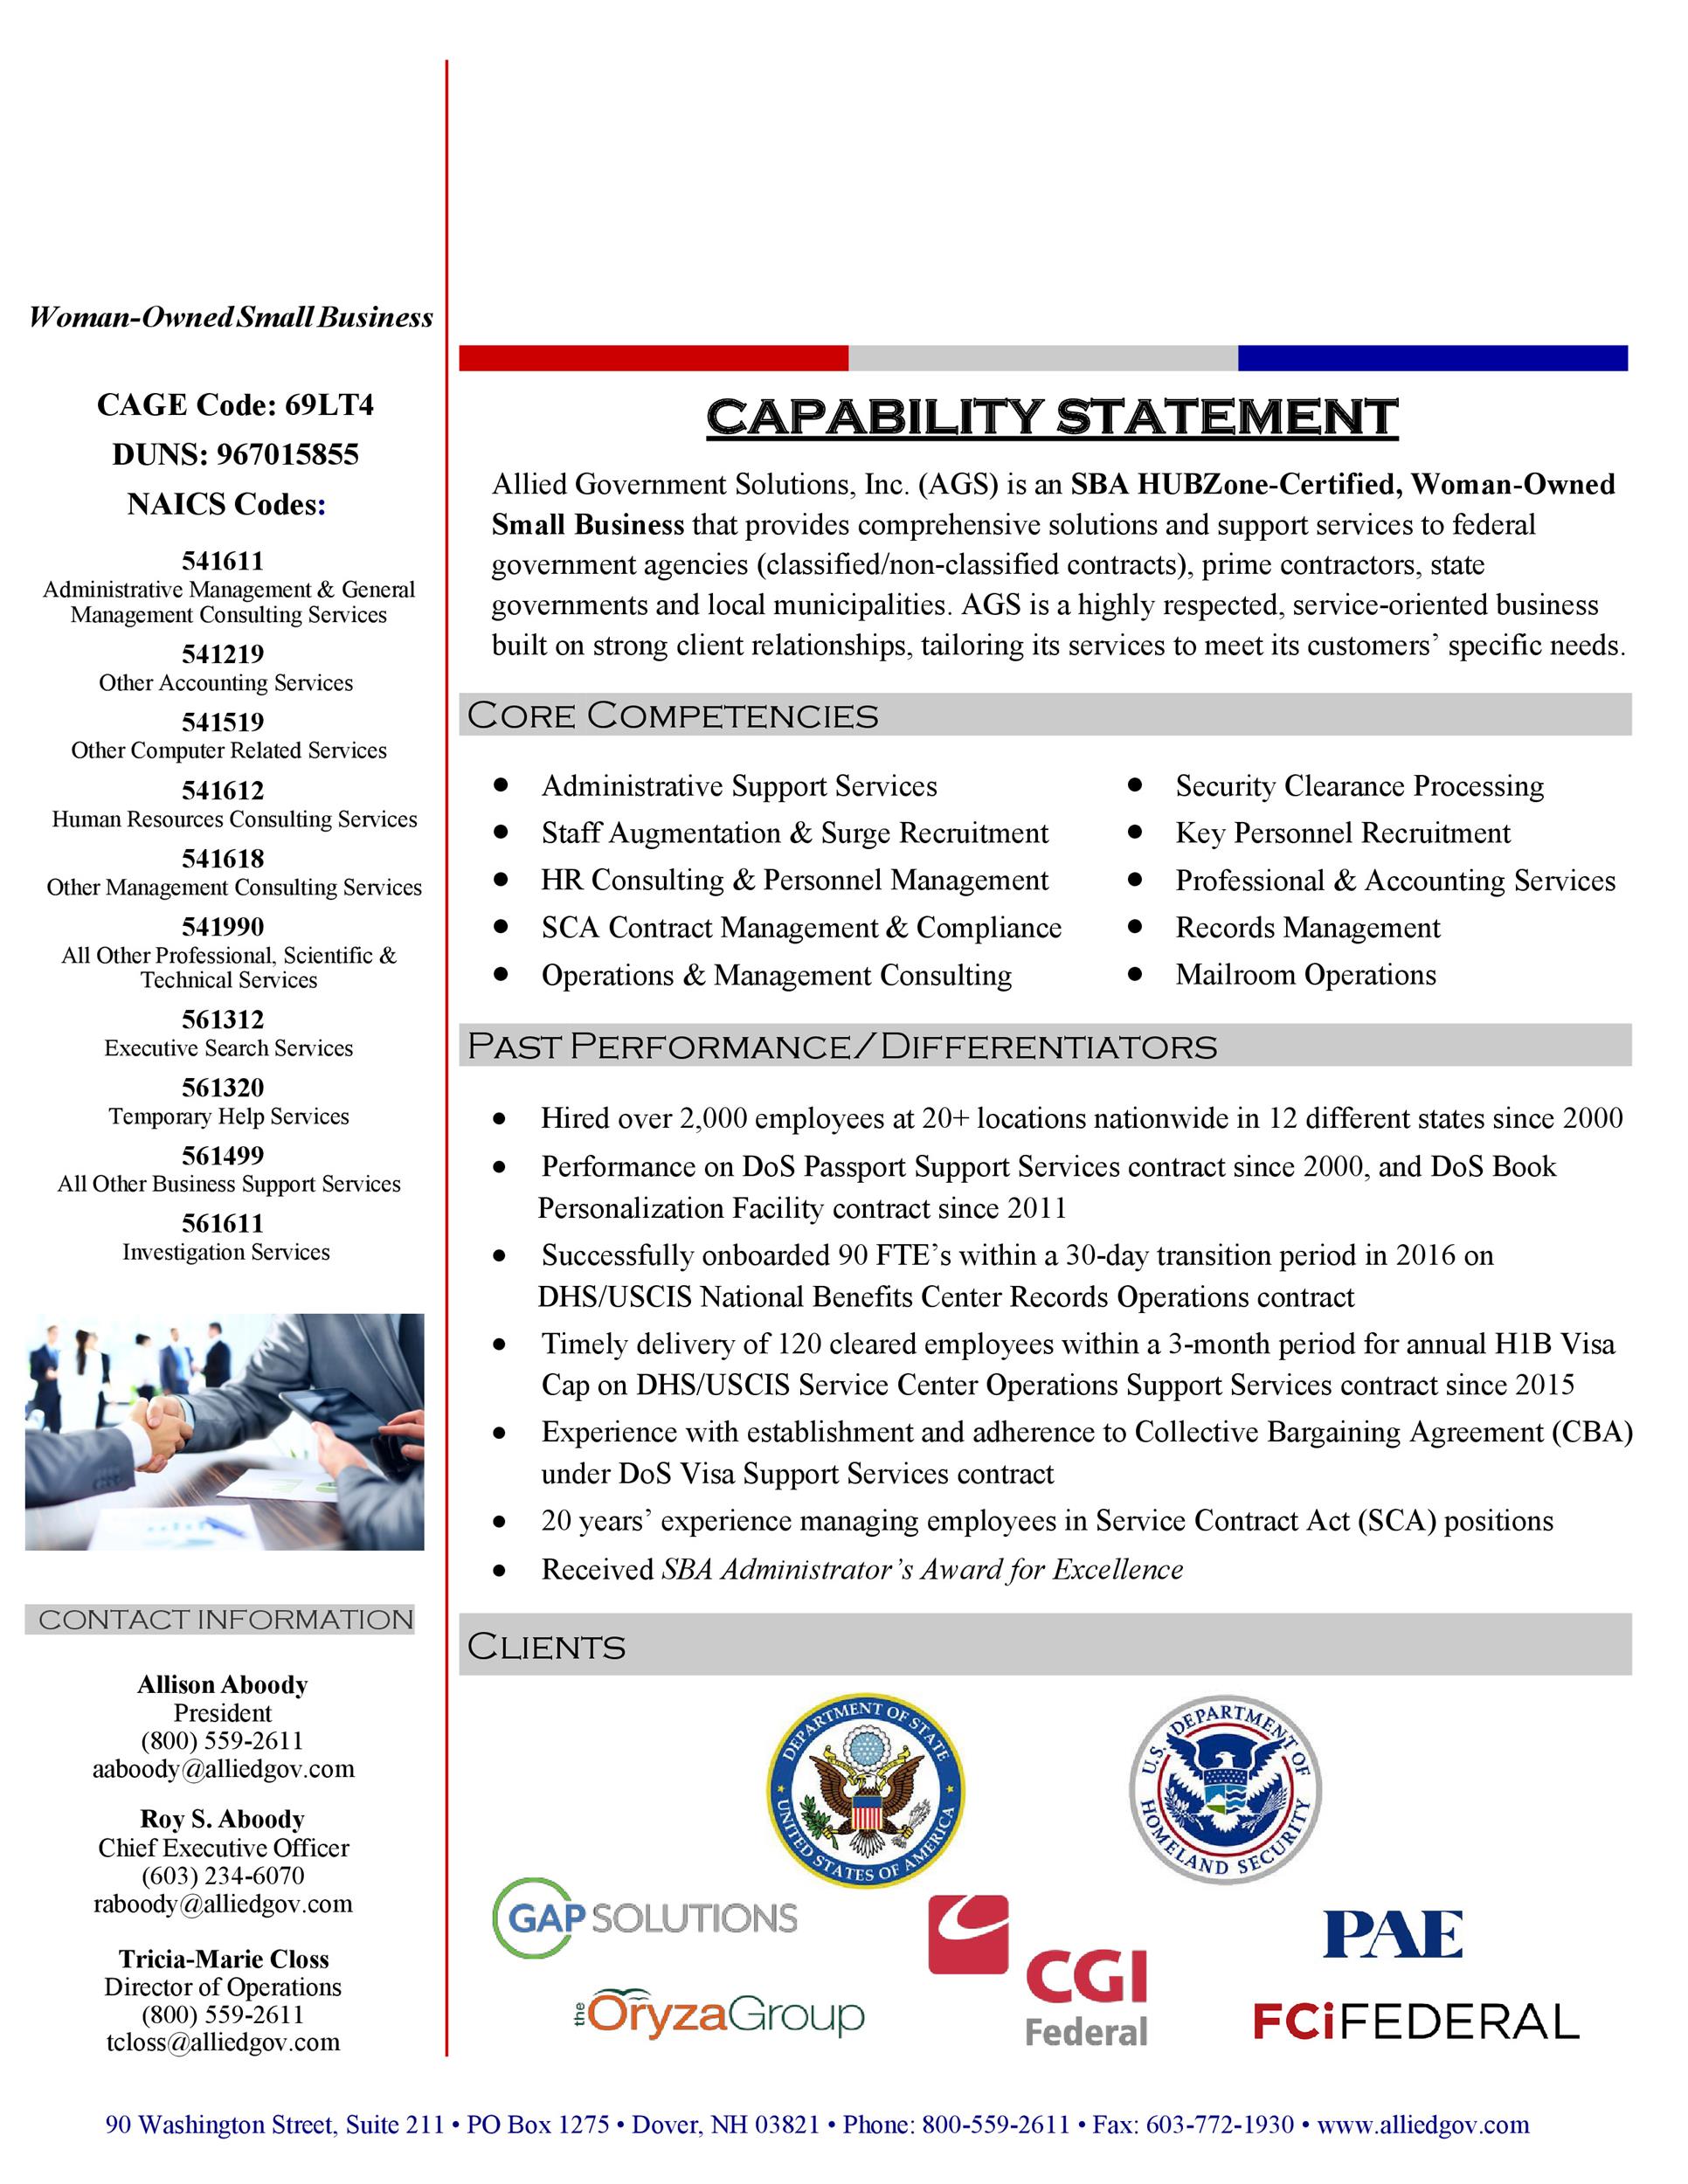 39-effective-capability-statement-templates-examples-templatelab